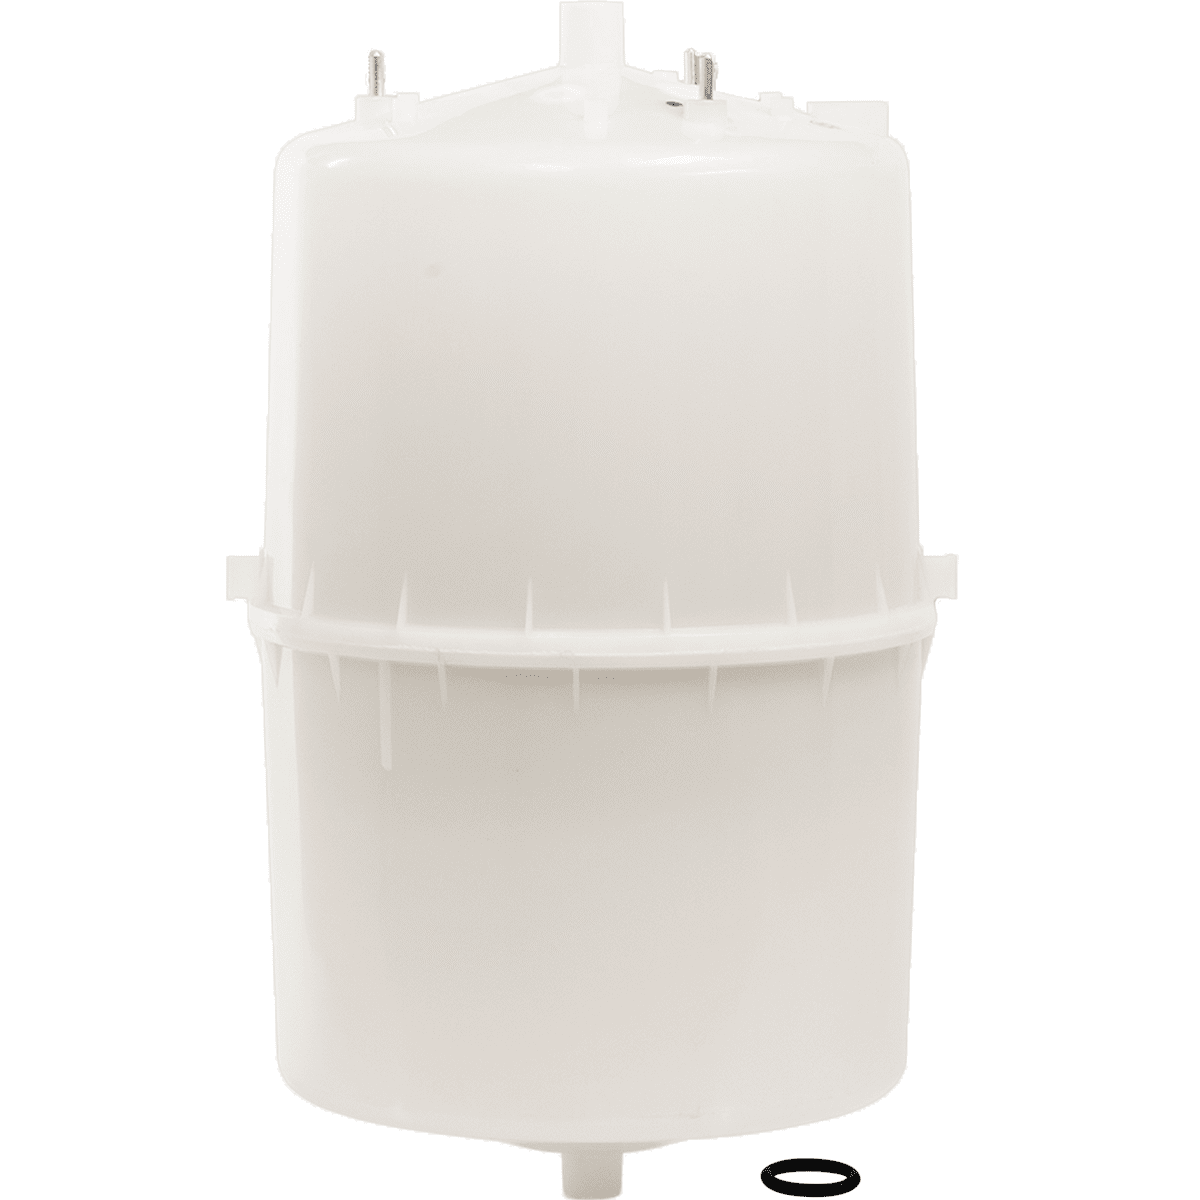 Aprilaire 421a Steam Humidifier Cylinder (fits Nortec® 421)